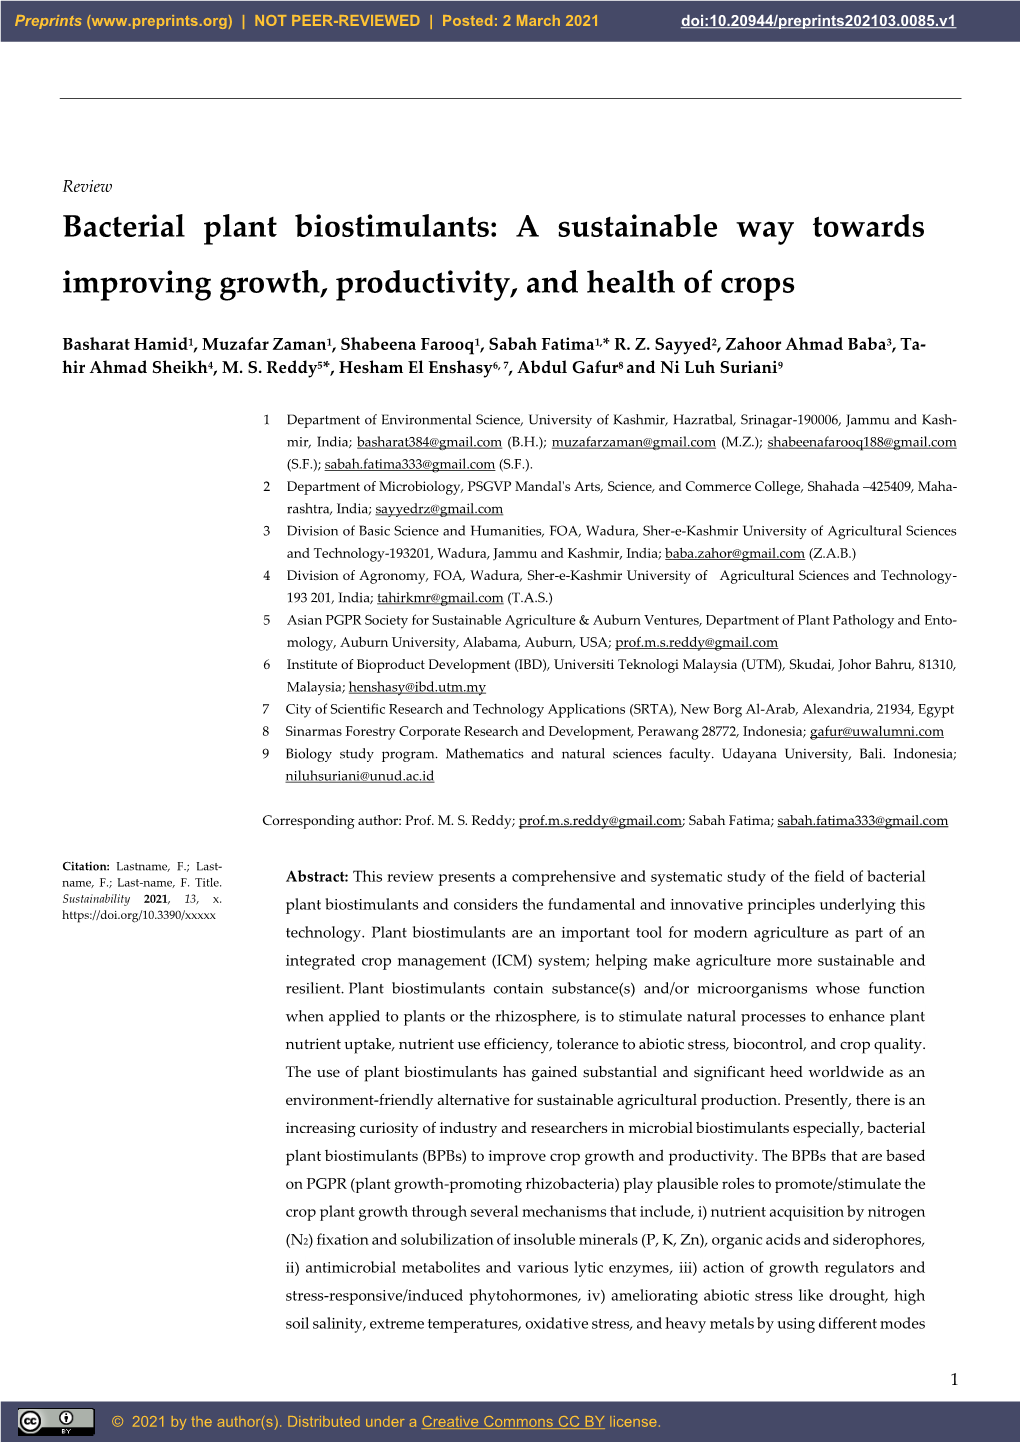 Bacterial Plant Biostimulants: a Sustainable Way Towards Improving Growth, Productivity, and Health of Crops